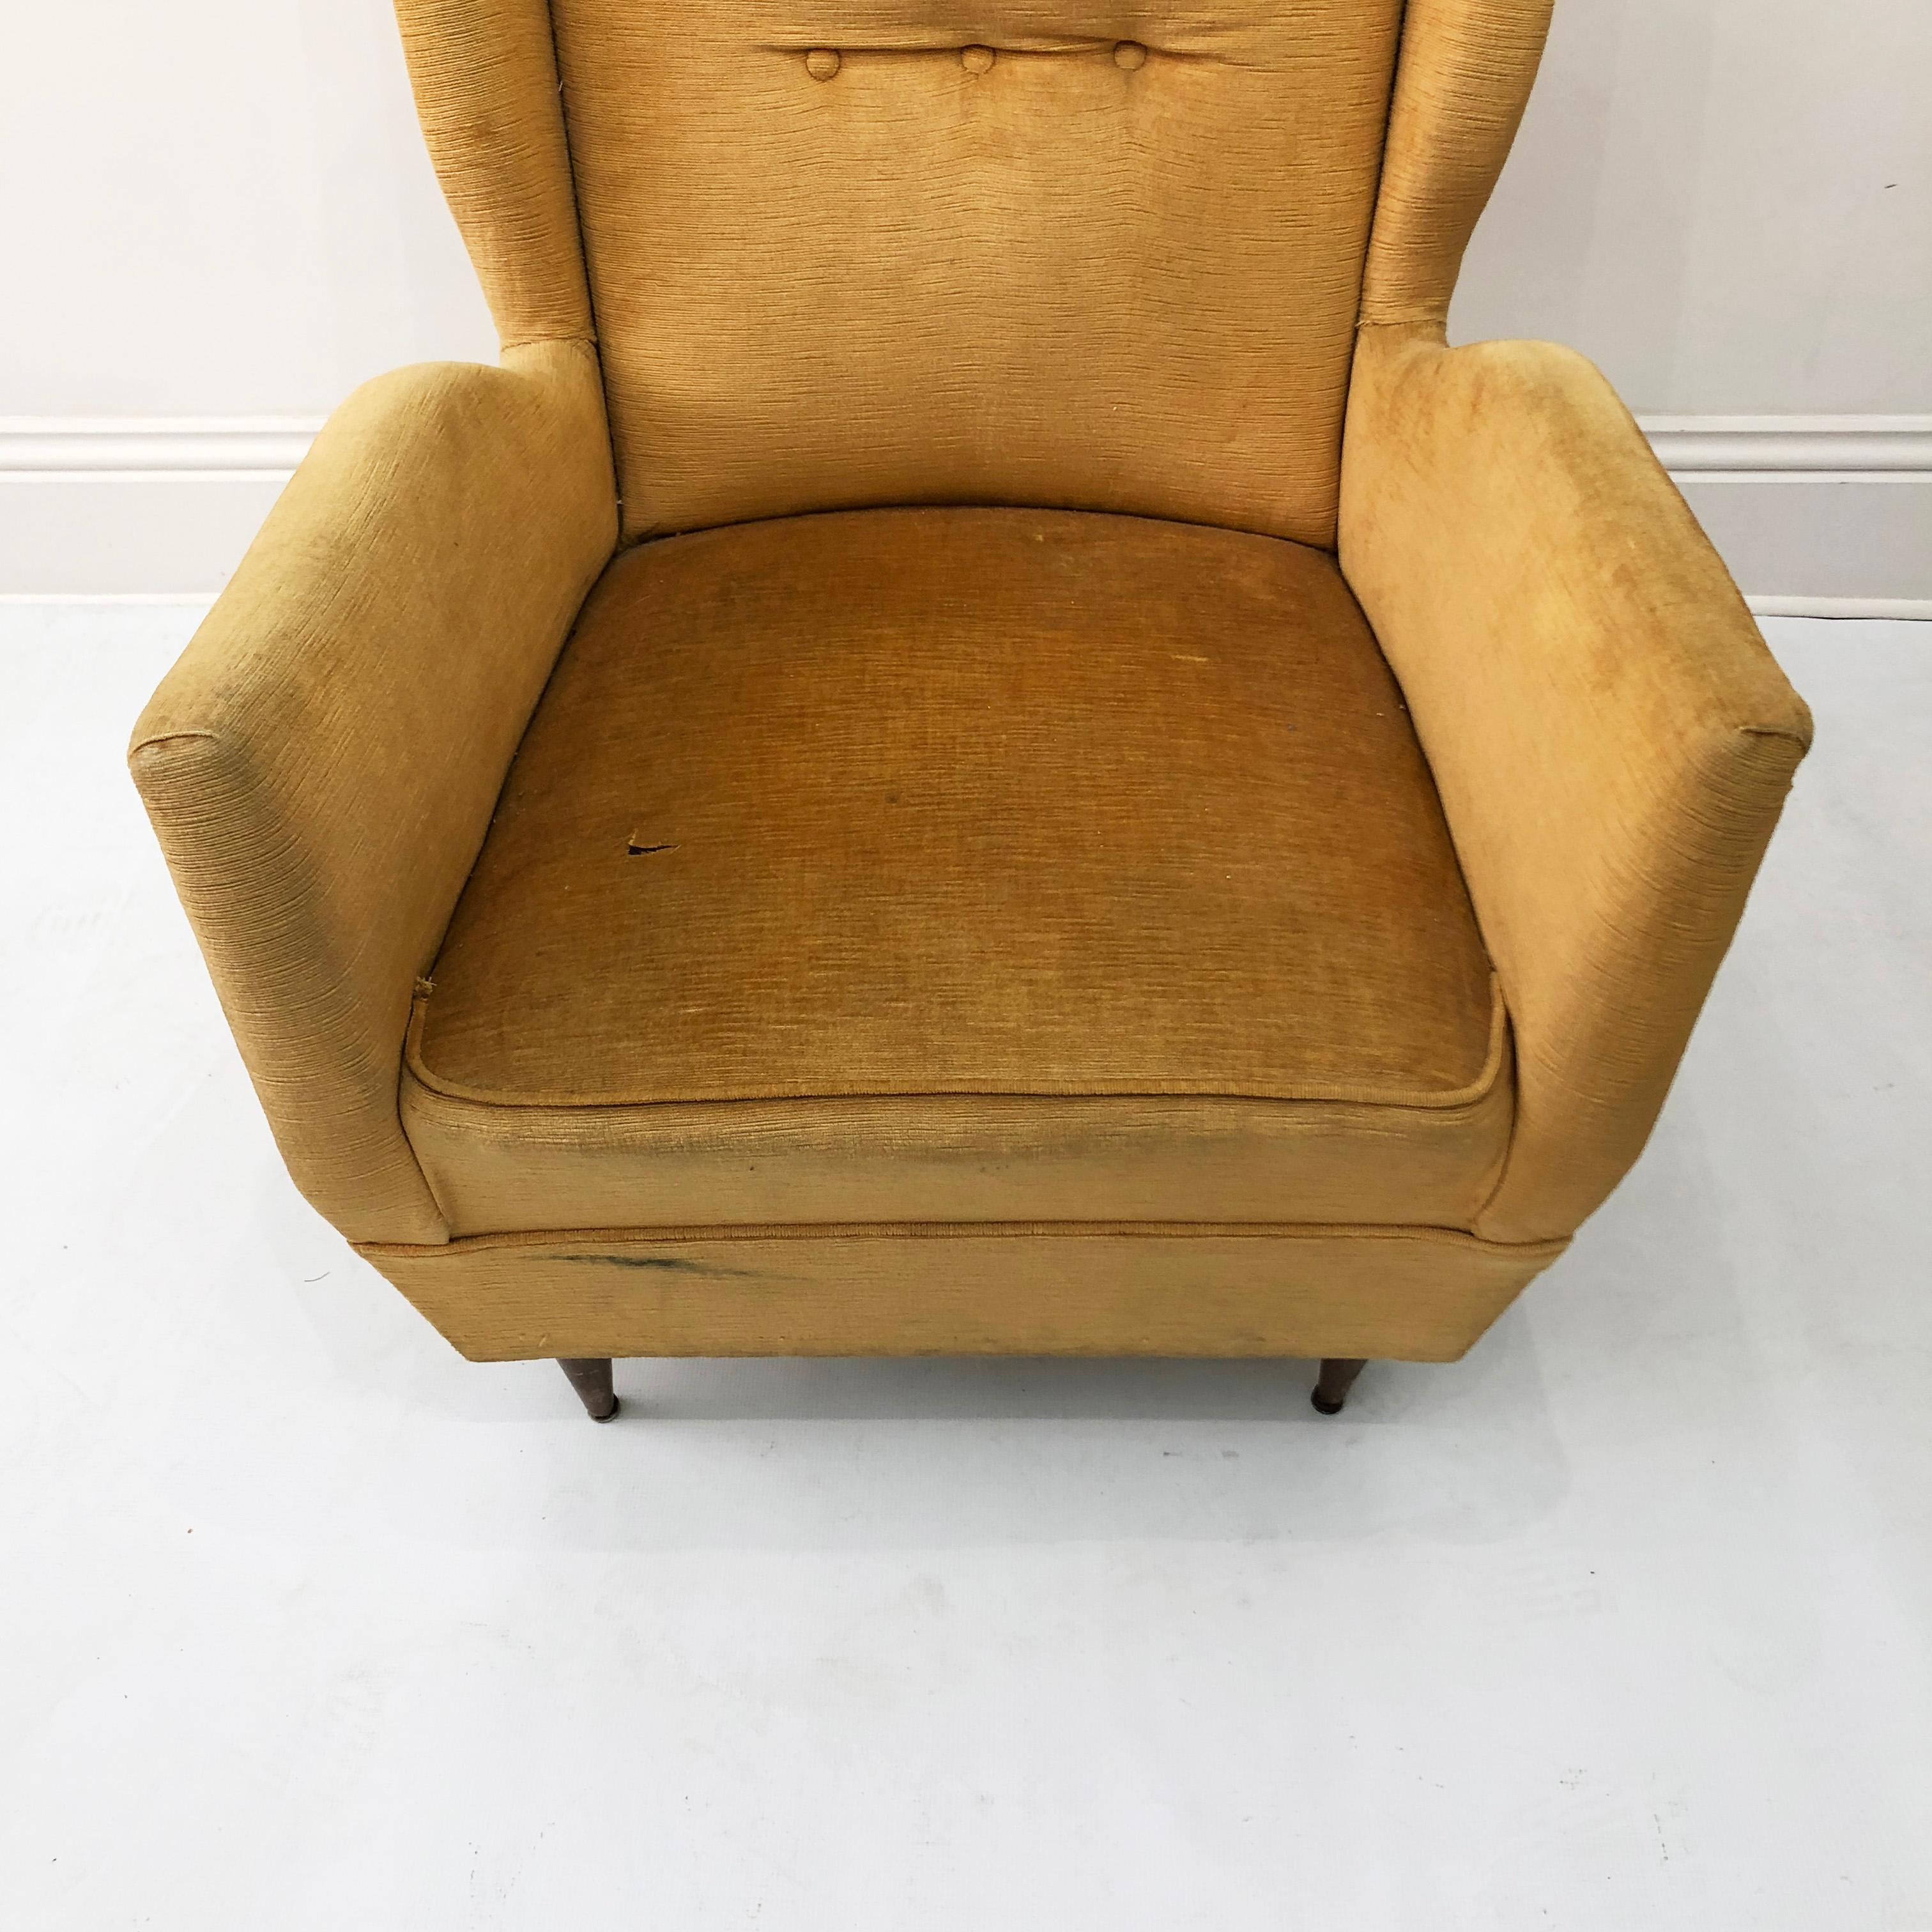 Italian Gio Ponti For I.S.A Wingback Armchair, 1950s Midcentury For Sale